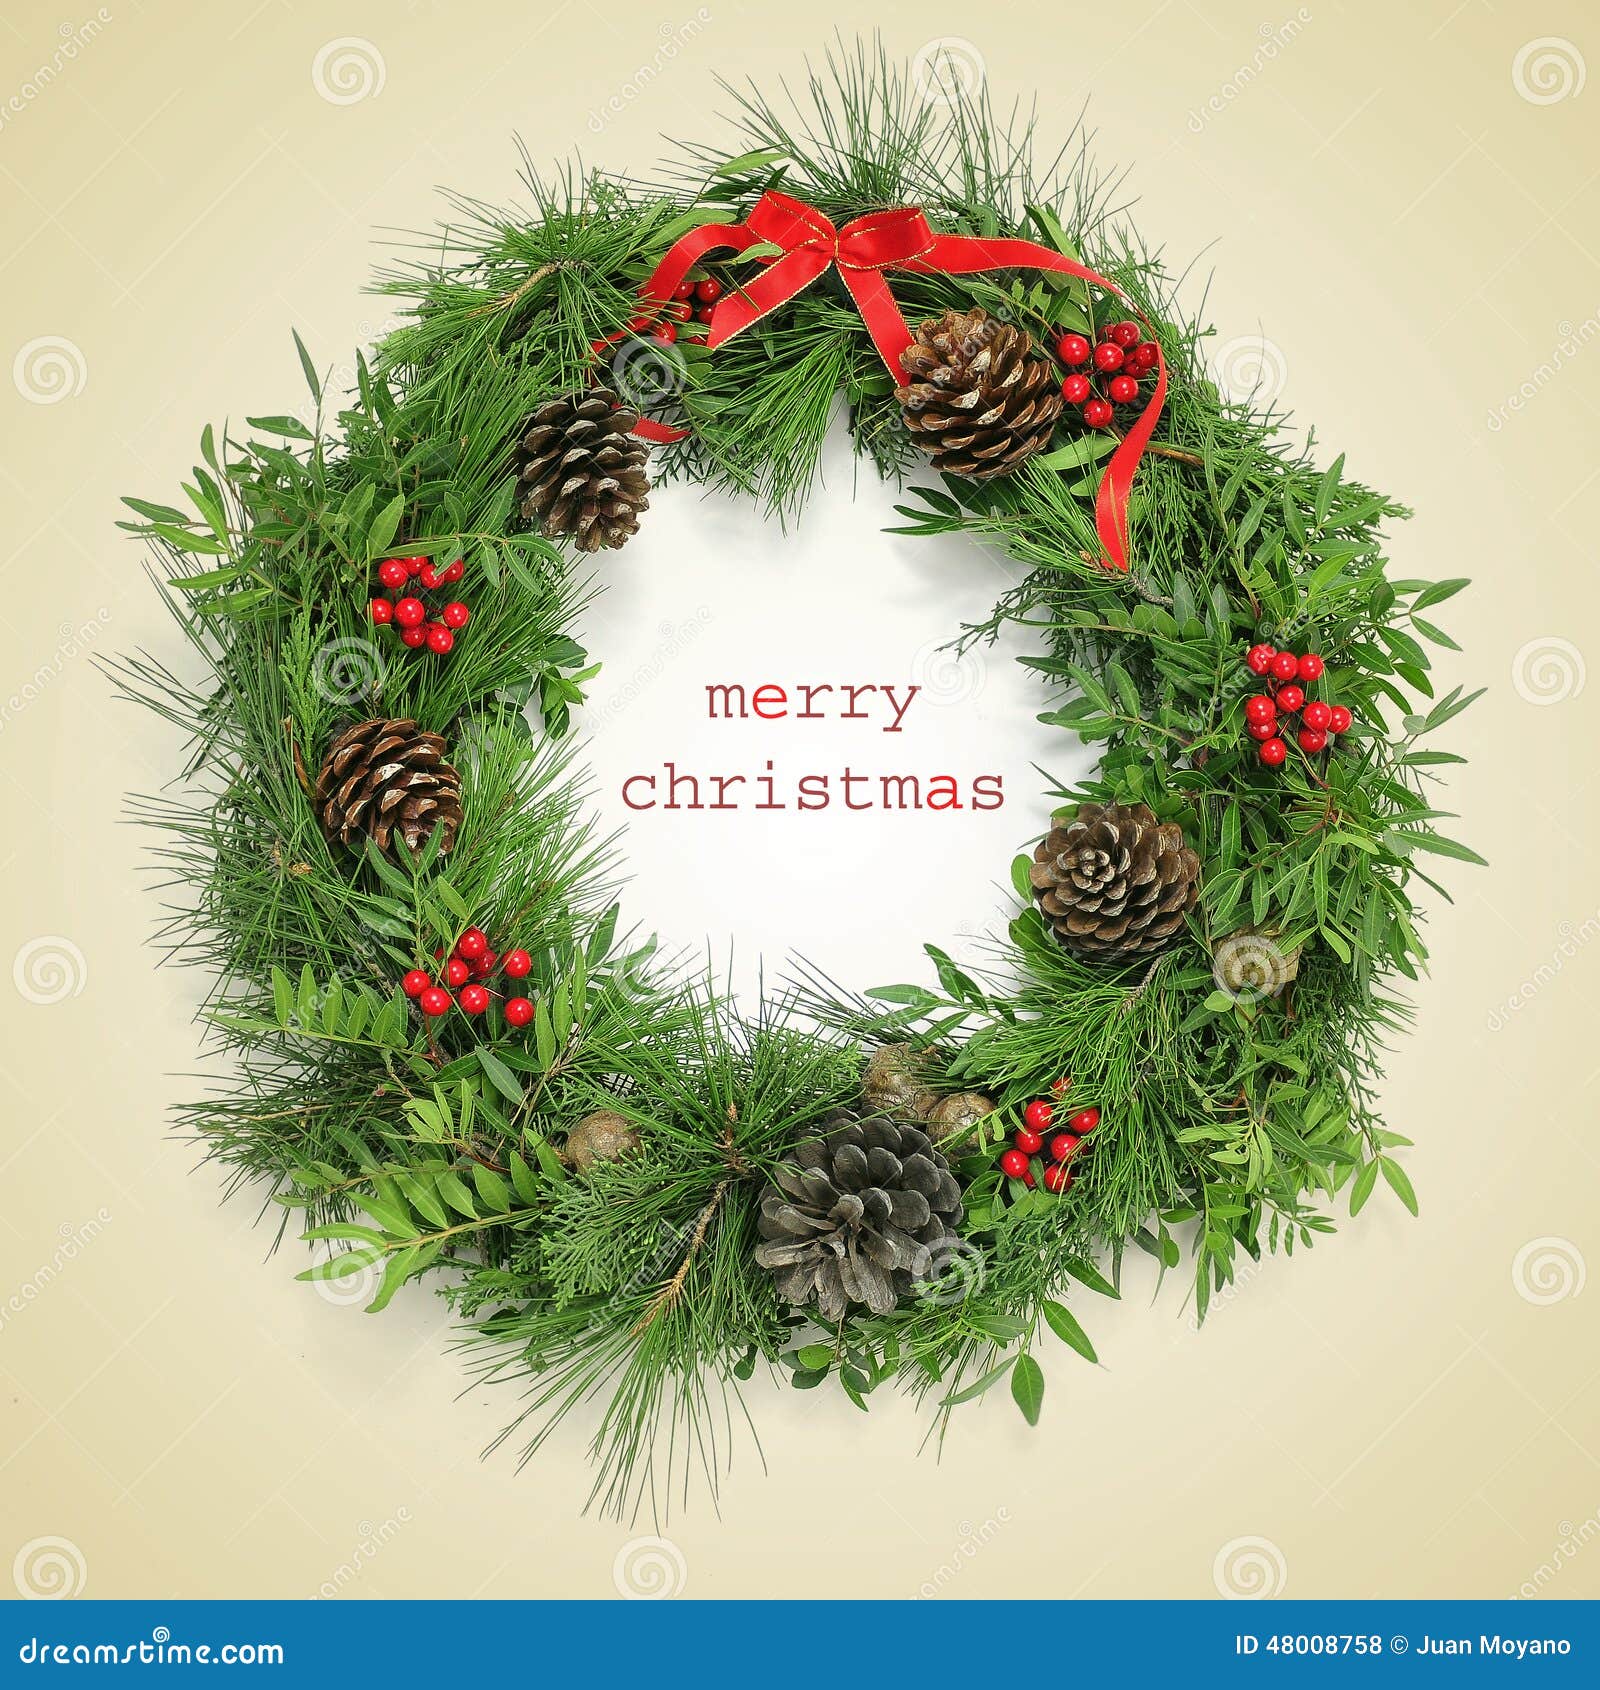 Text Merry Christmas and Natural Christmas Wreath, with a Retro Stock ...